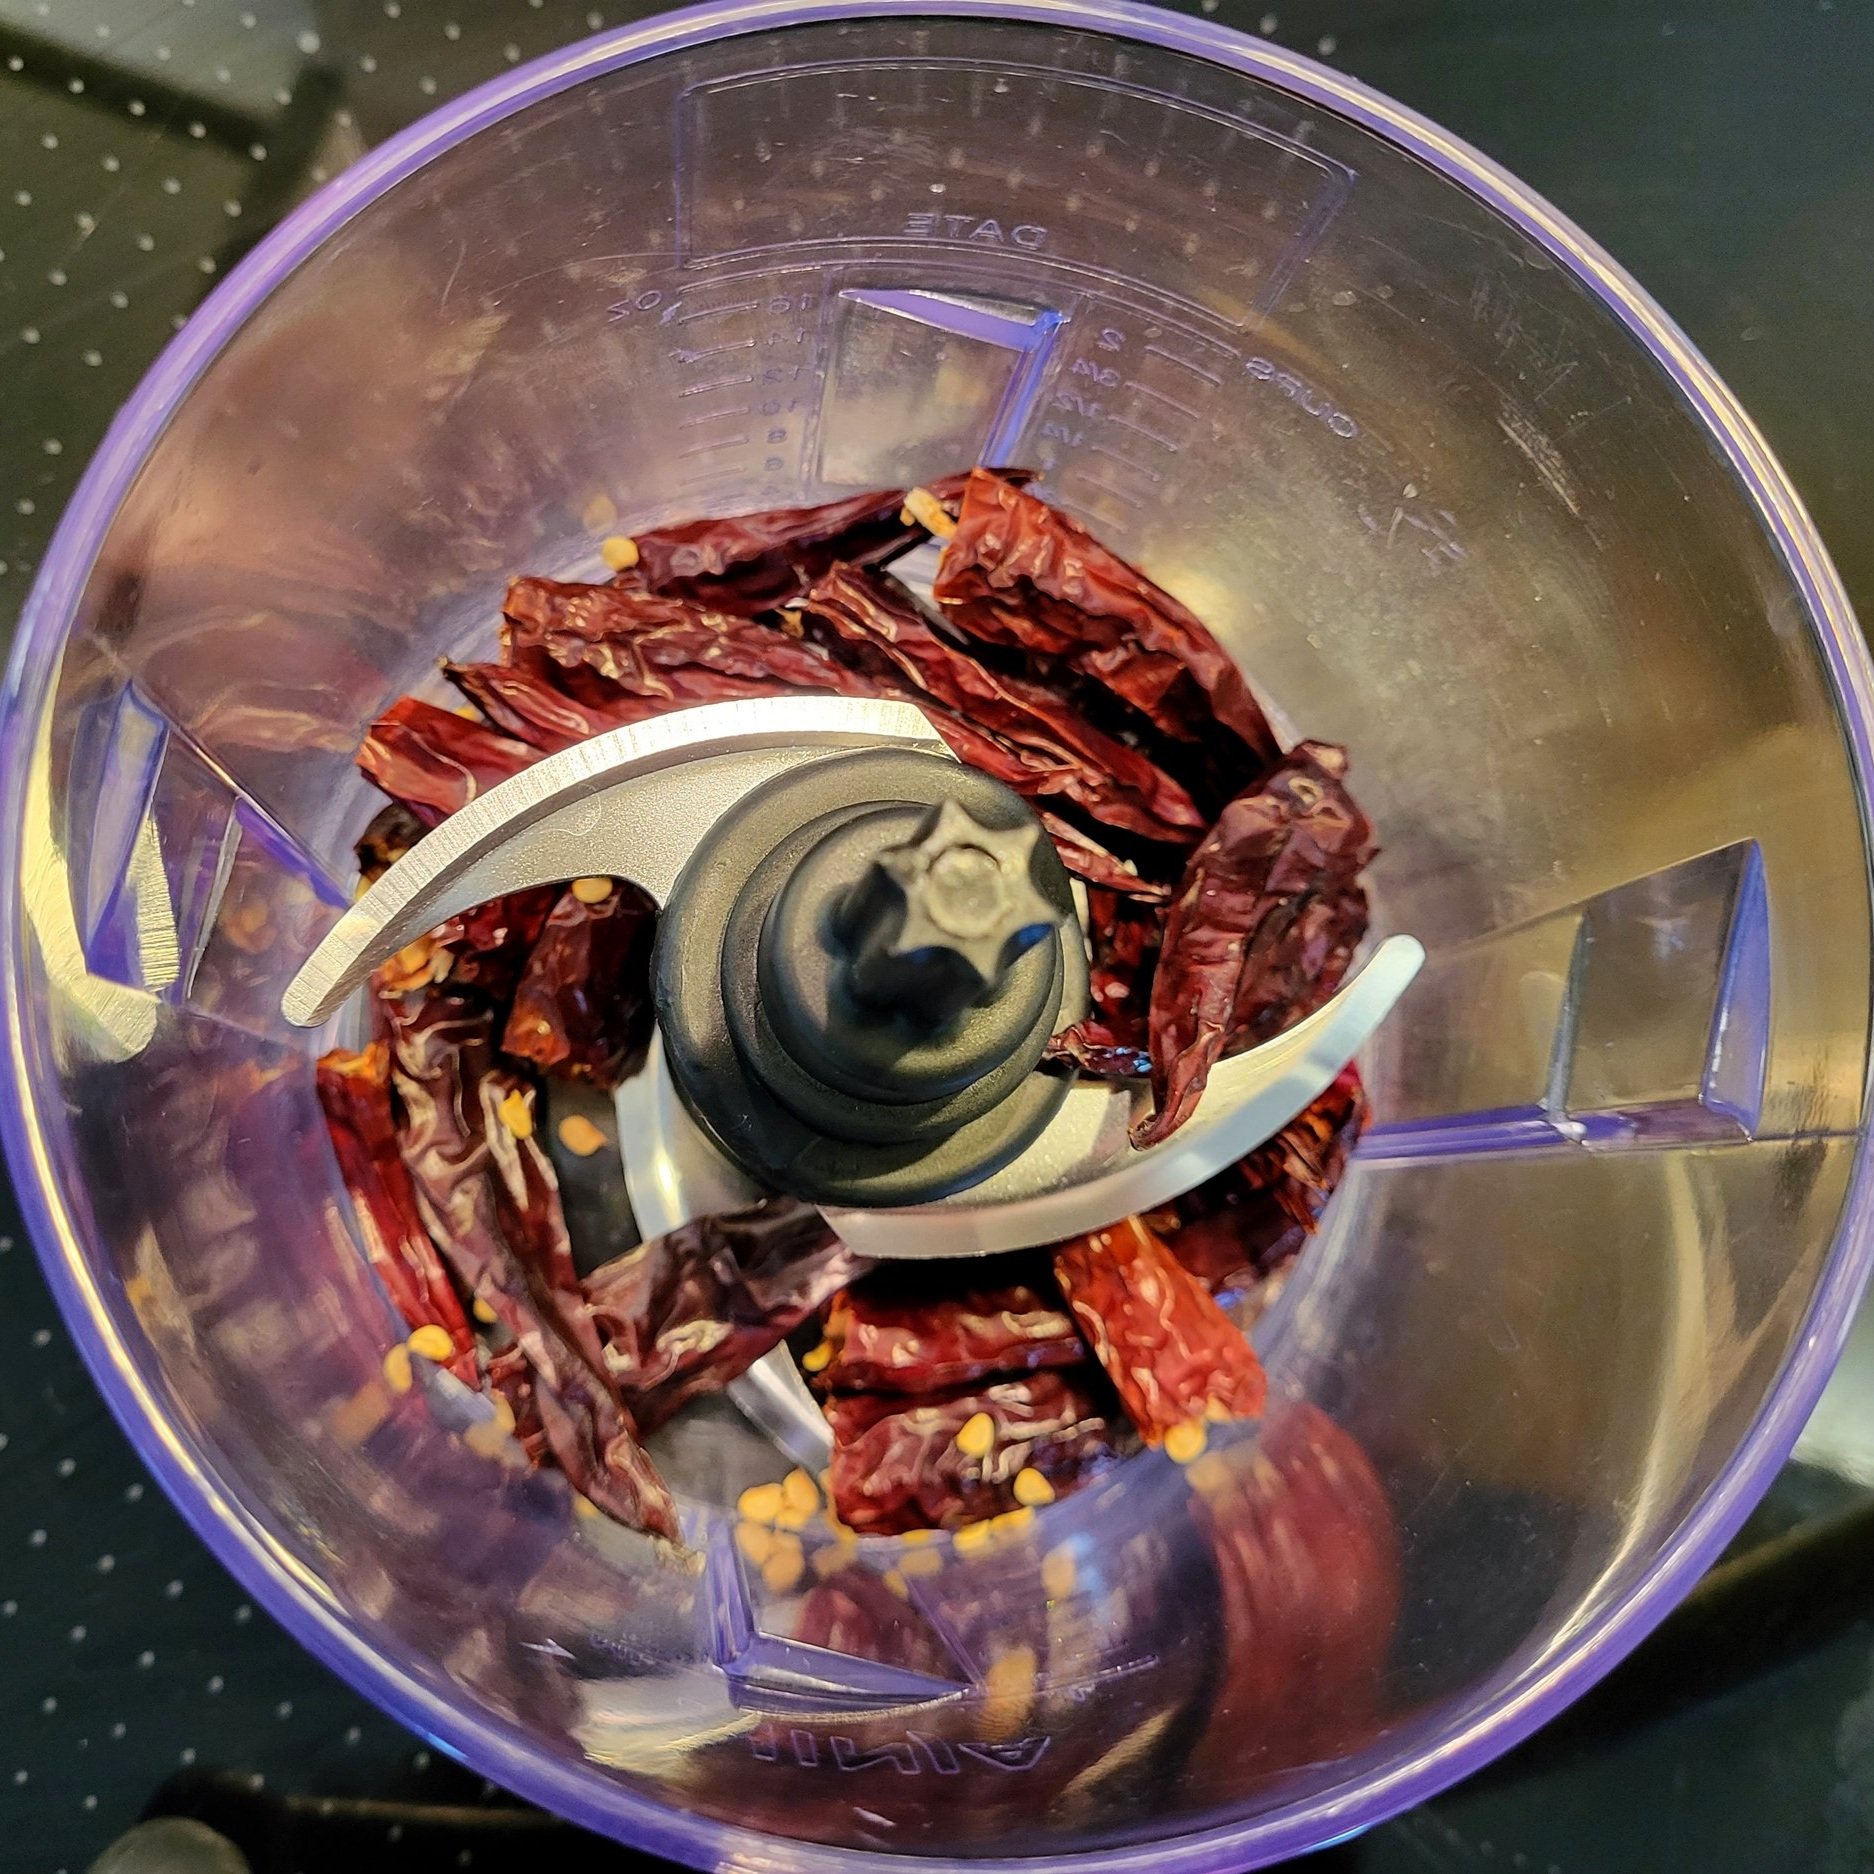 Dried whole chillis in the blender